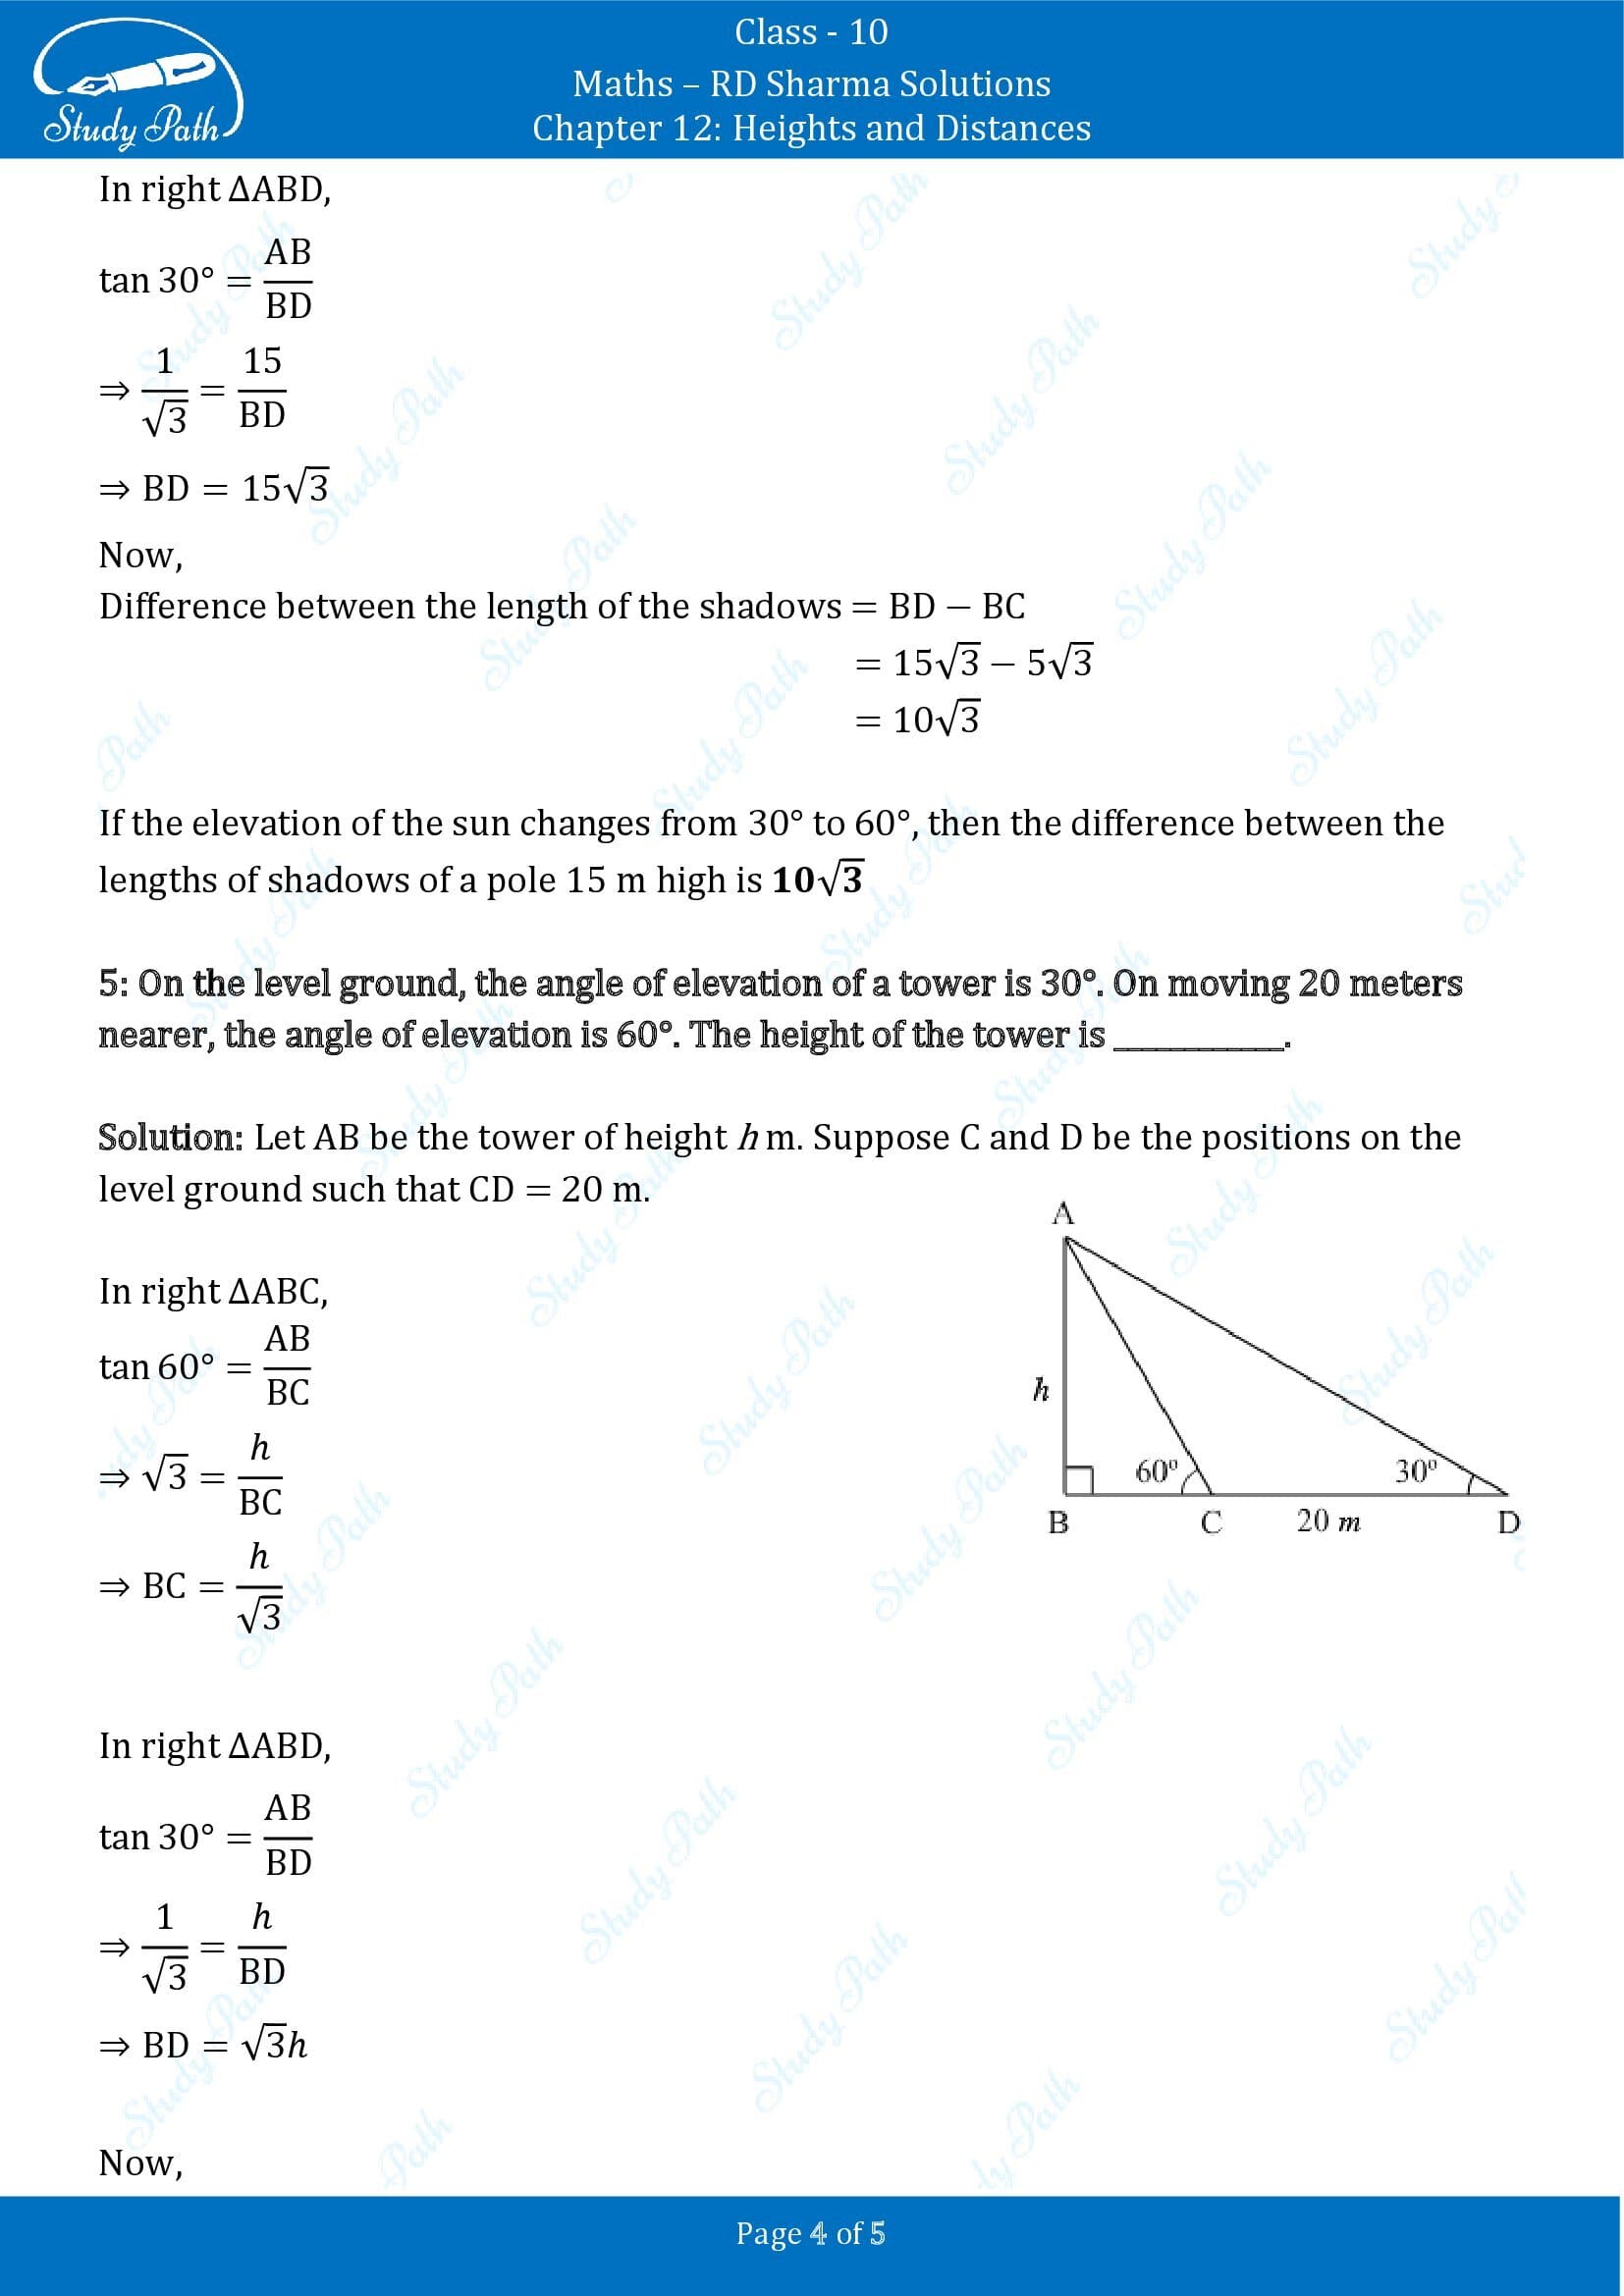 RD Sharma Solutions Class 10 Chapter 12 Heights and Distances Fill in the Blank Type Questions FBQs 00004